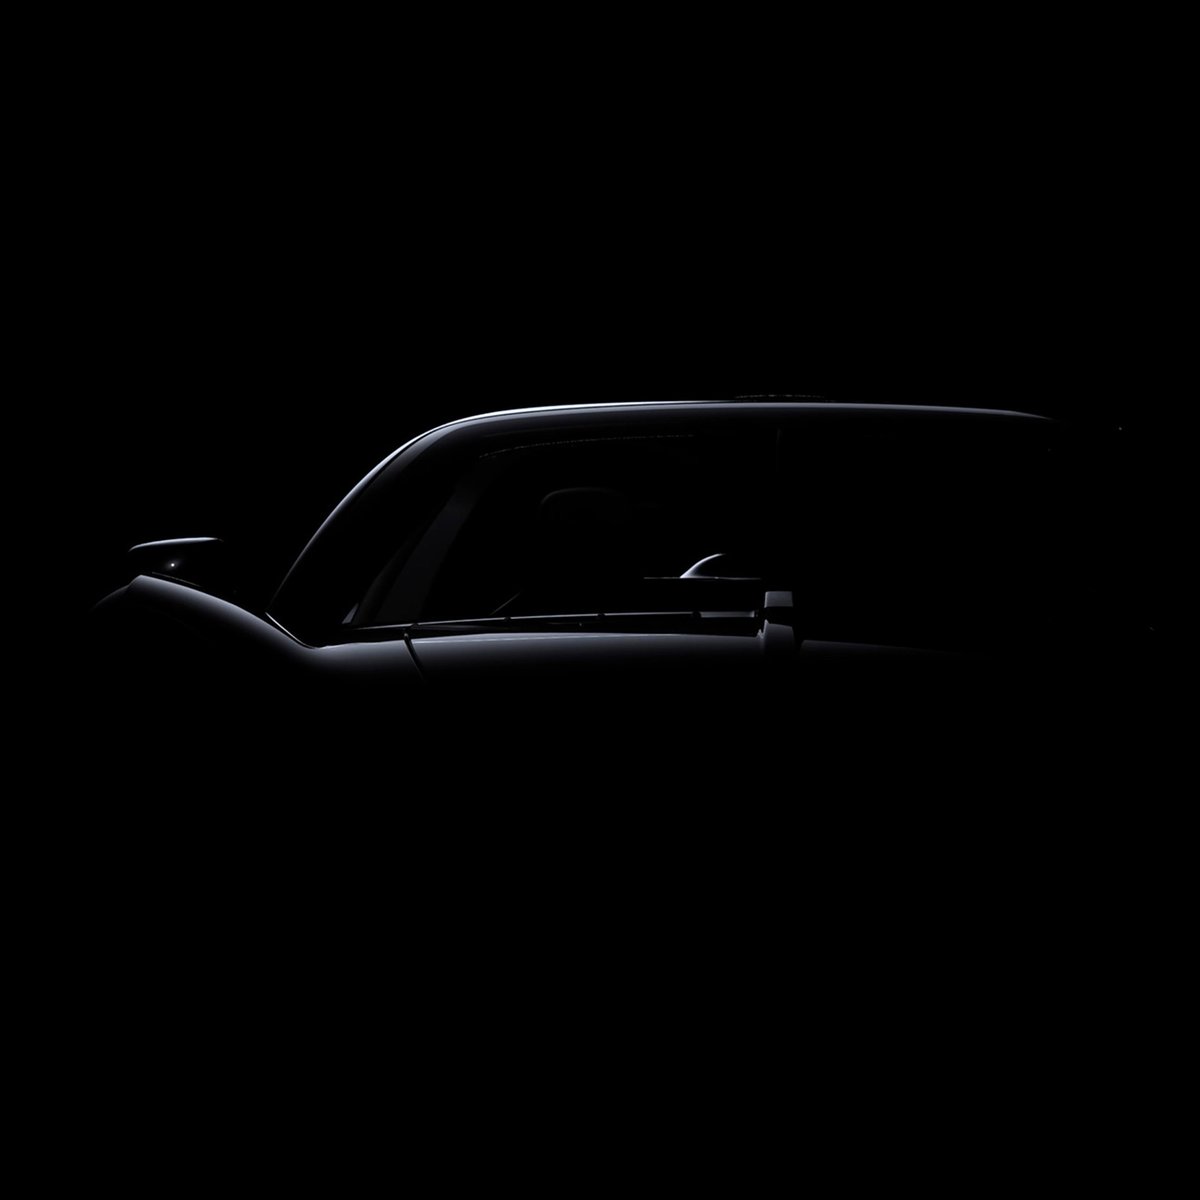 In 72-hours the T.33 Spider – designed and engineered to be the world’s most engaging V12-powered open supercar – will make its global debut. View the reveal at gordonmurrayautomotive.com on Tuesday 04 April at 17:00 BST. #gordonmurrayautomotive #gordonmurray #v12 #gma